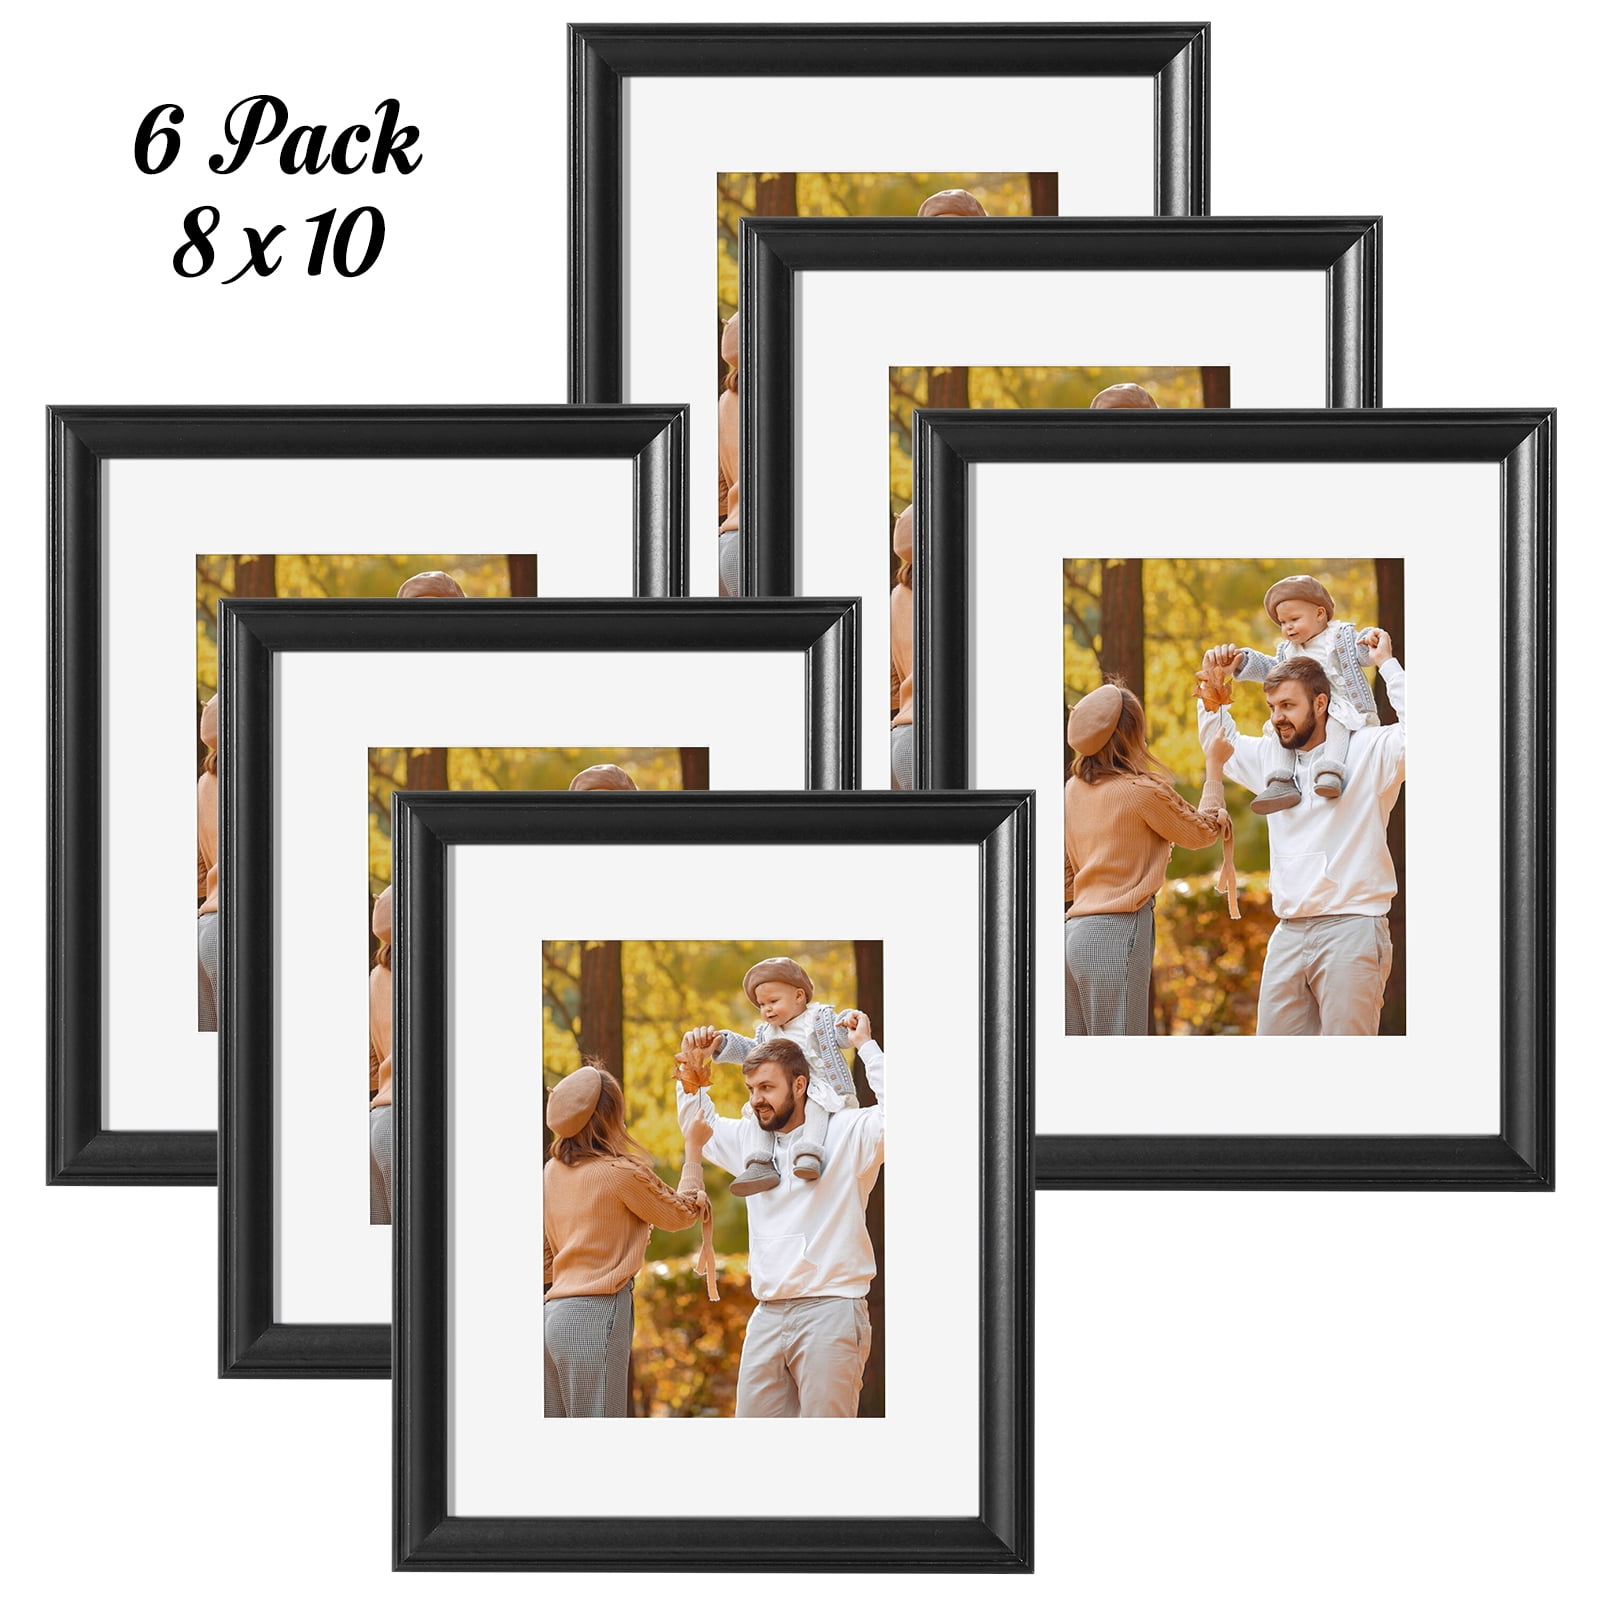 Lavish Home Picture Frame Set, Document Frame Pack for Picture Gallery Wall  with Hangers, Set of 6